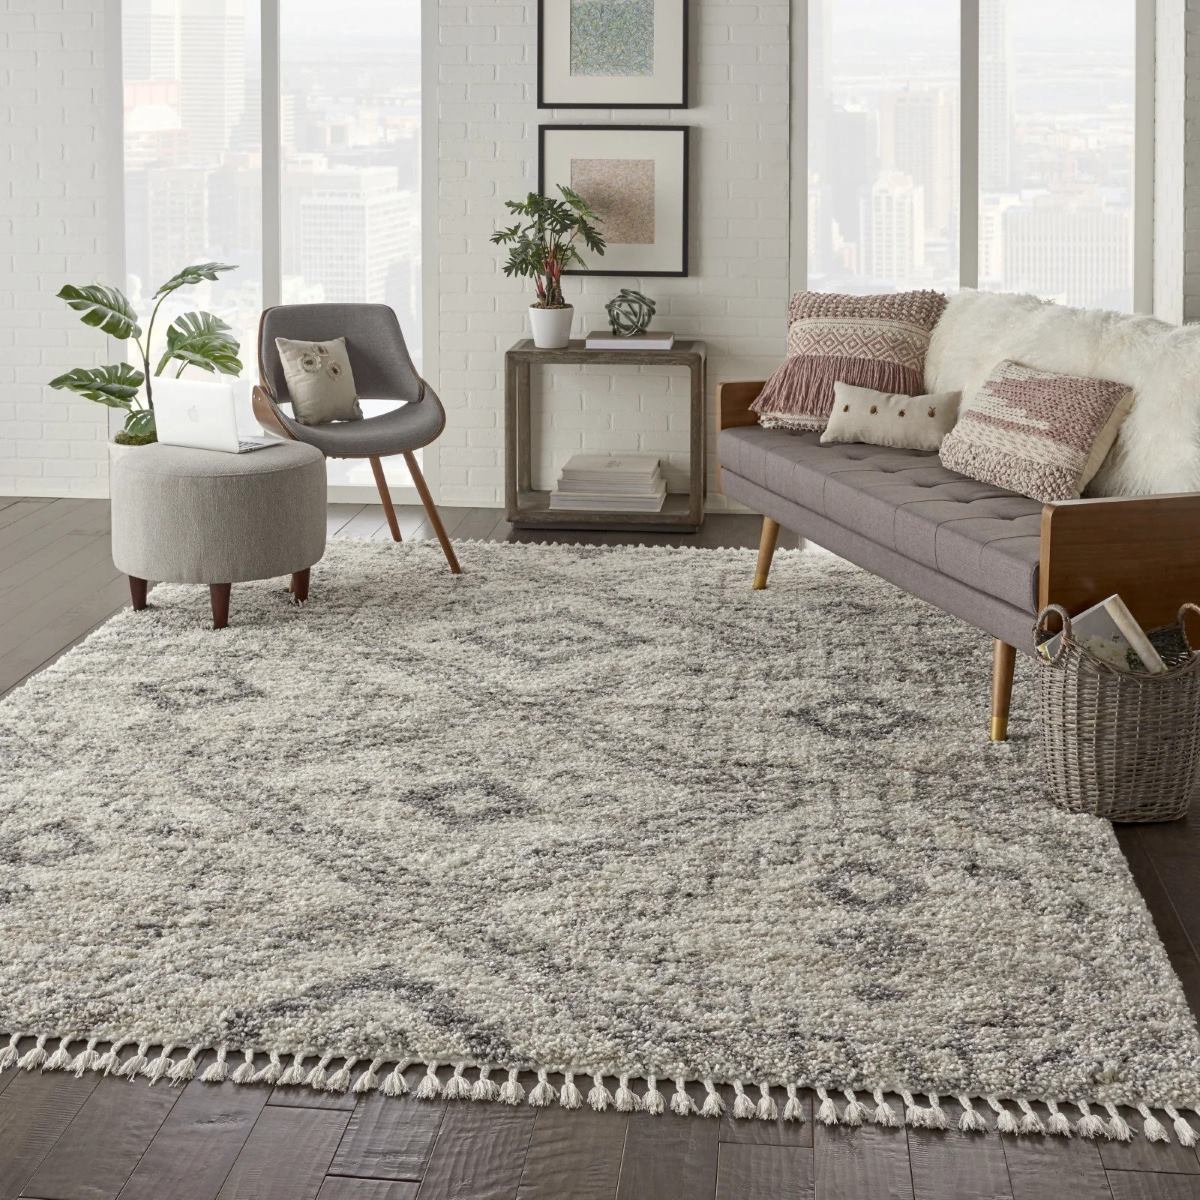 What Are Scandinavian Rugs Called